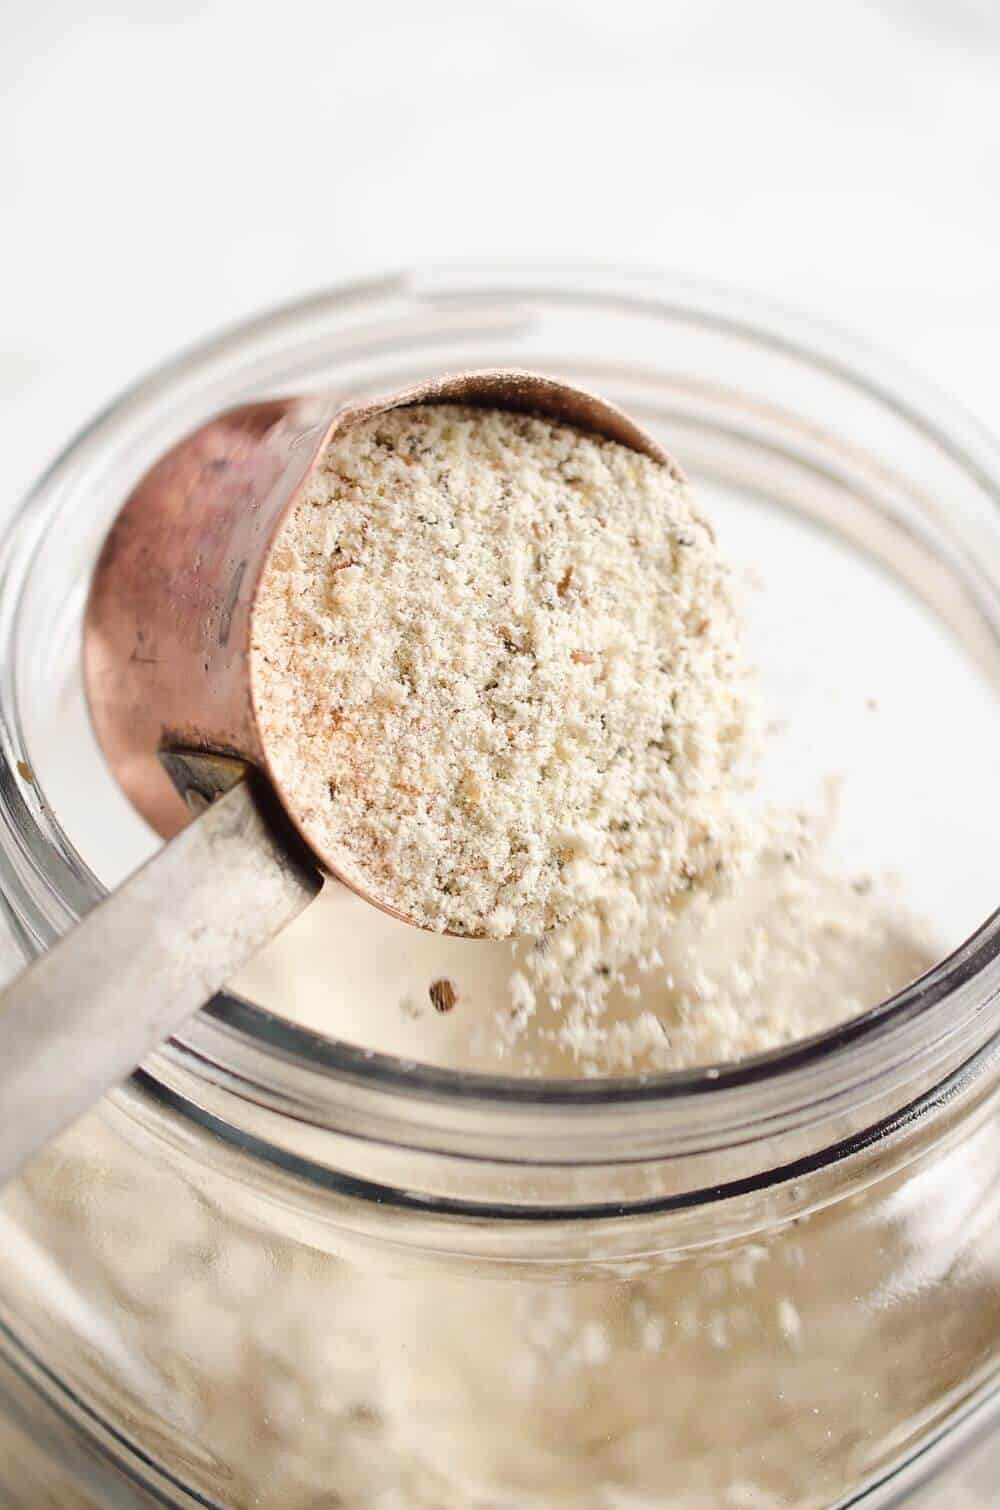 Protein Smoothie Booster is an easy way to make your blended beverages healthier with added protein, fiber and vitamins. Take your smoothies and shakes to the next level with this healthy mixture of protein powder, flaxseed, almond meal and chia seeds. 